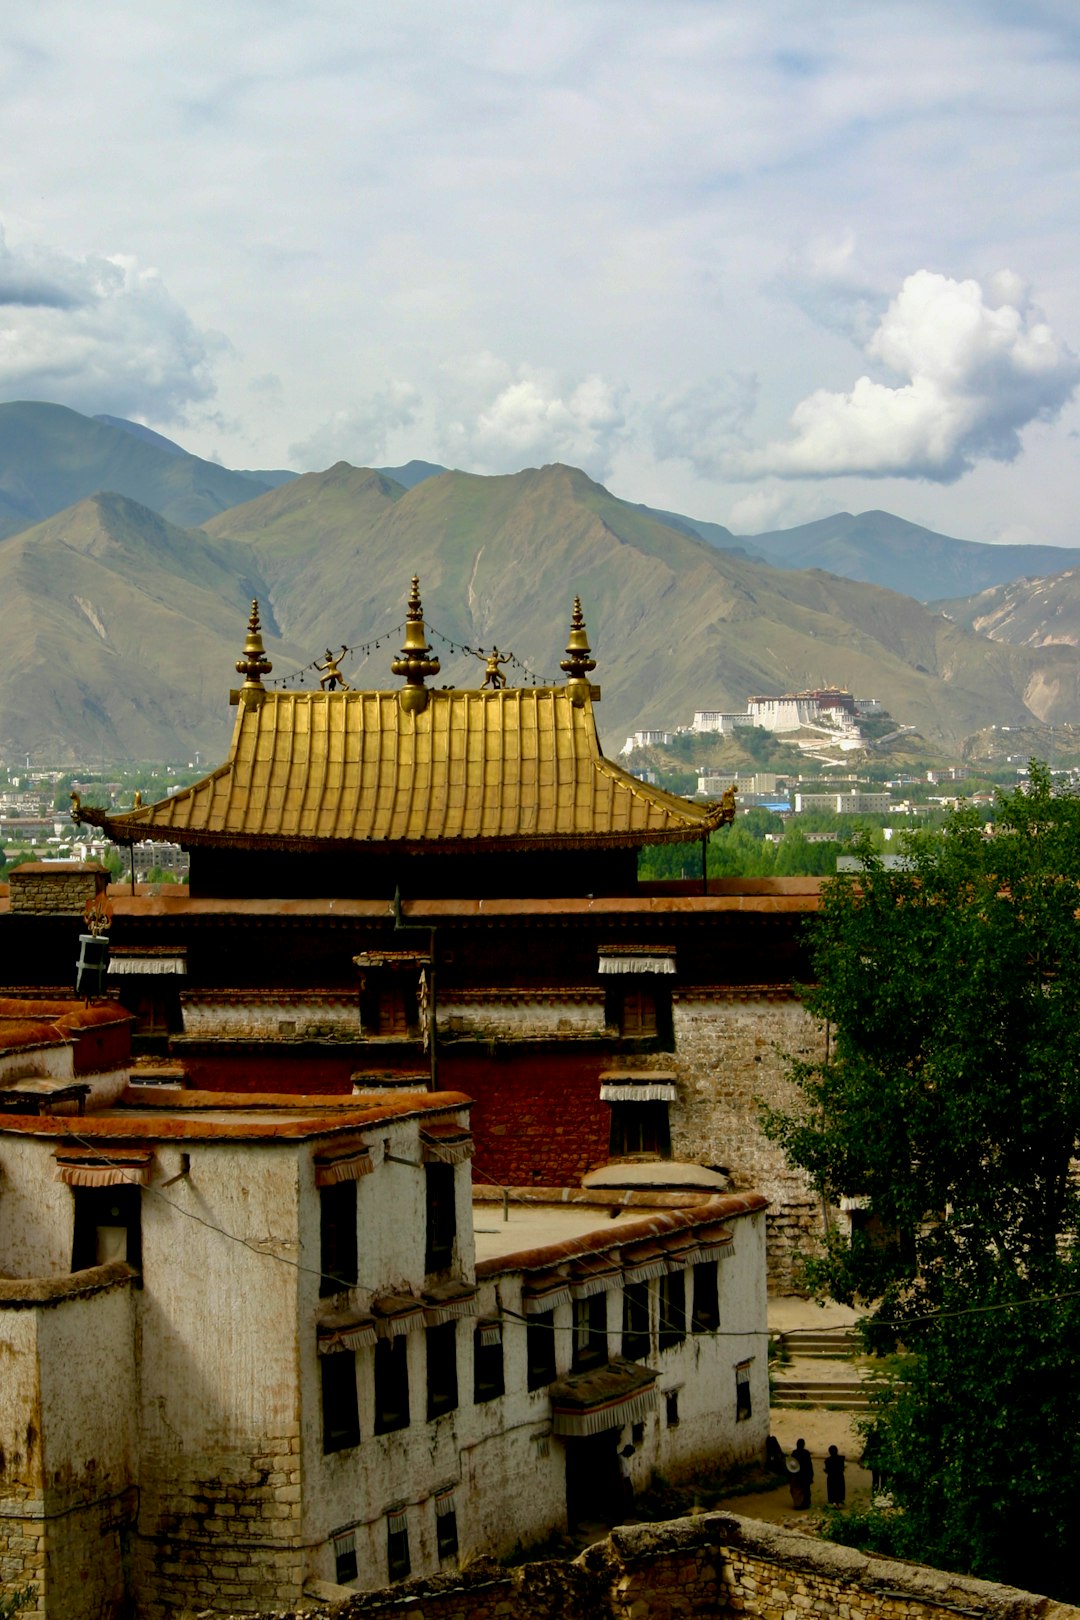 brown and white temple near green trees and mountains during daytime